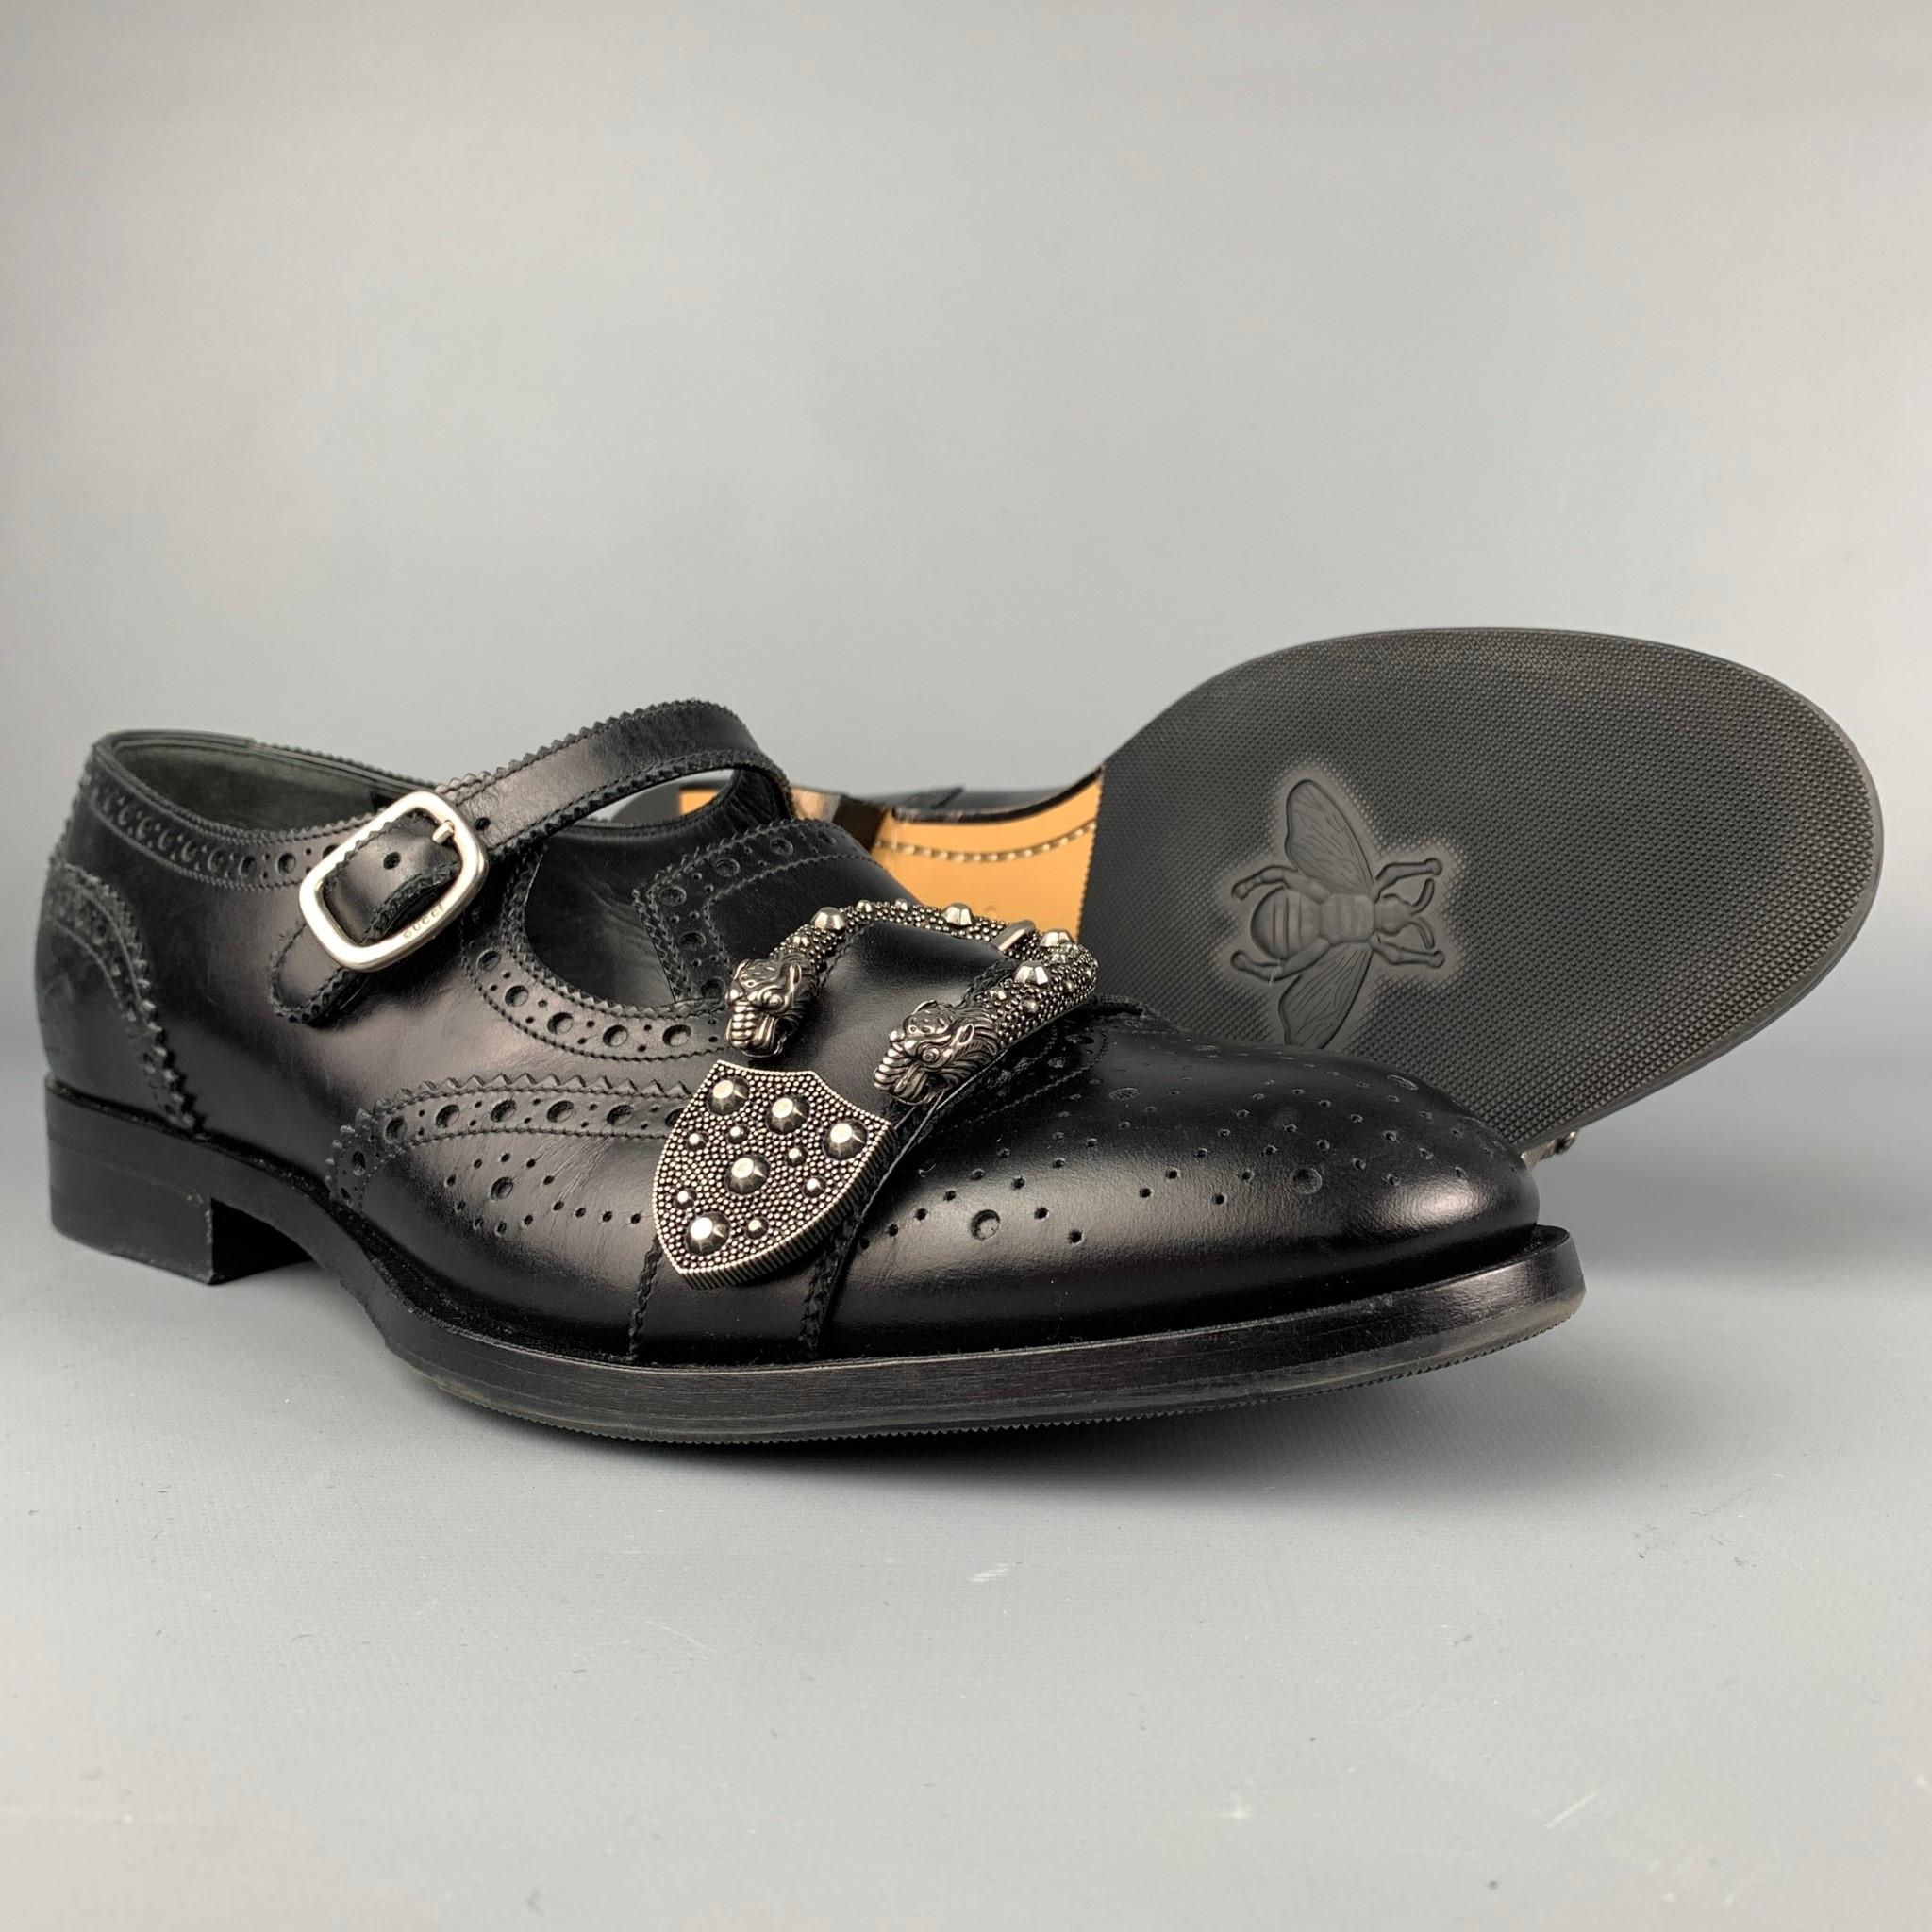 GUCCI loafers comes in a black perforated leather featuring a silver tone 